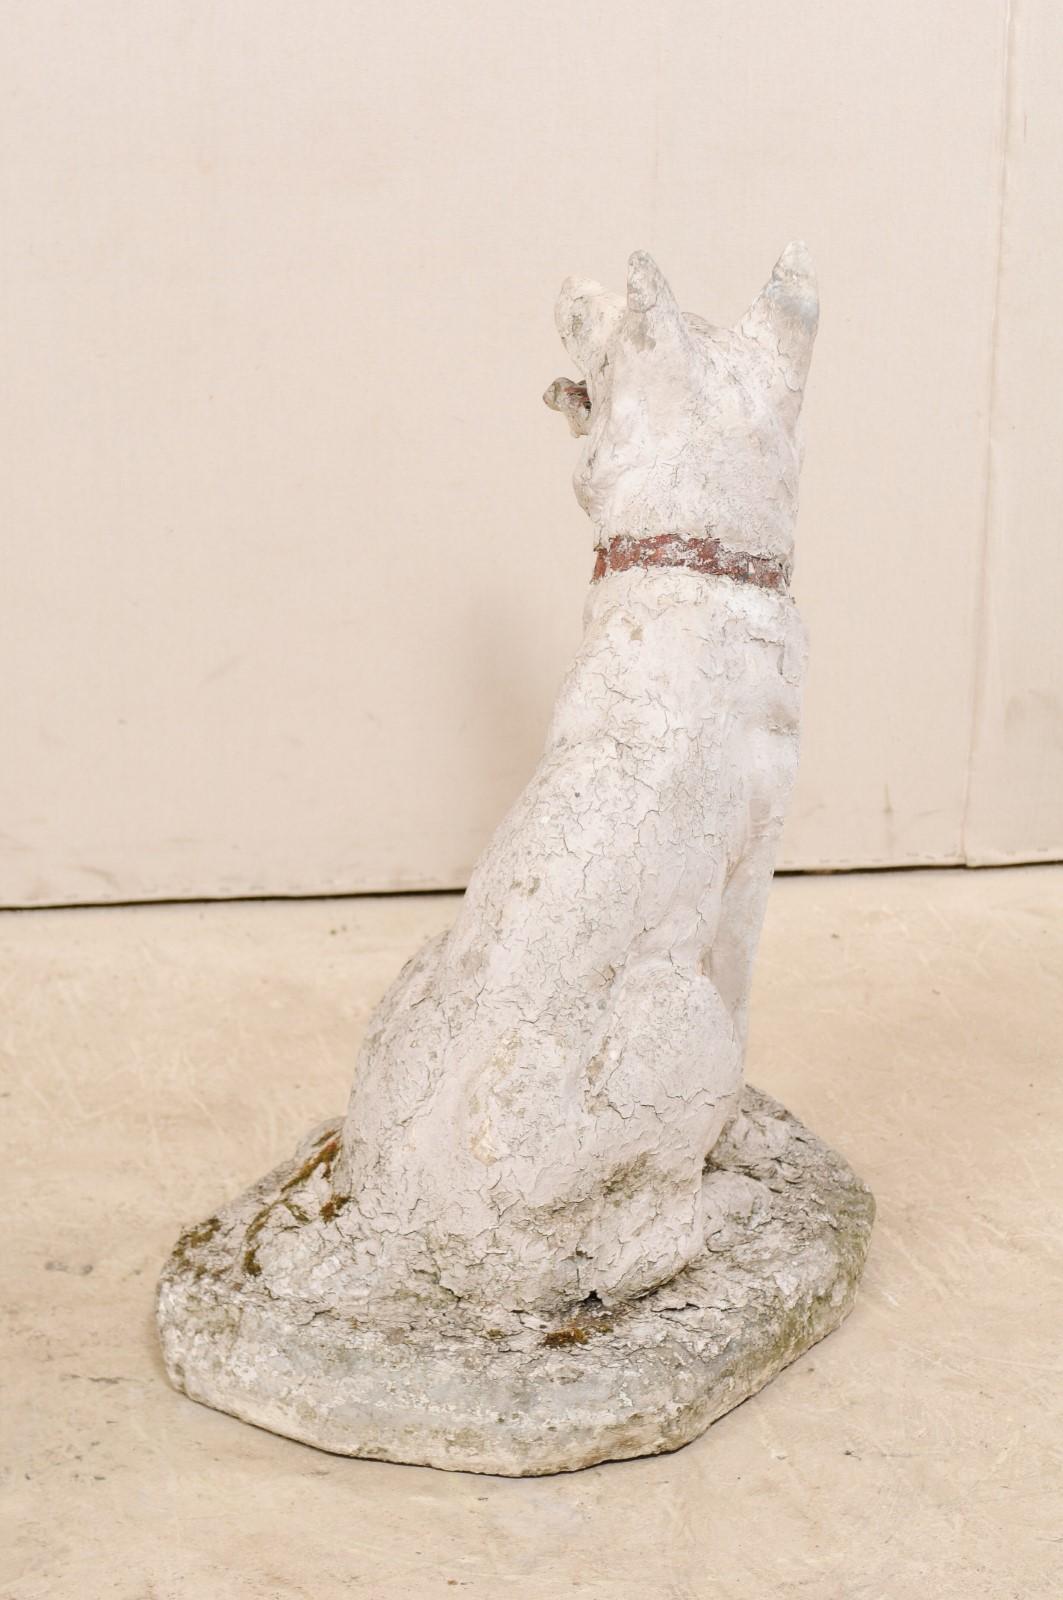 French Shepherd Dog Garden Statue from Early 20th Century, Nicely Sized 3